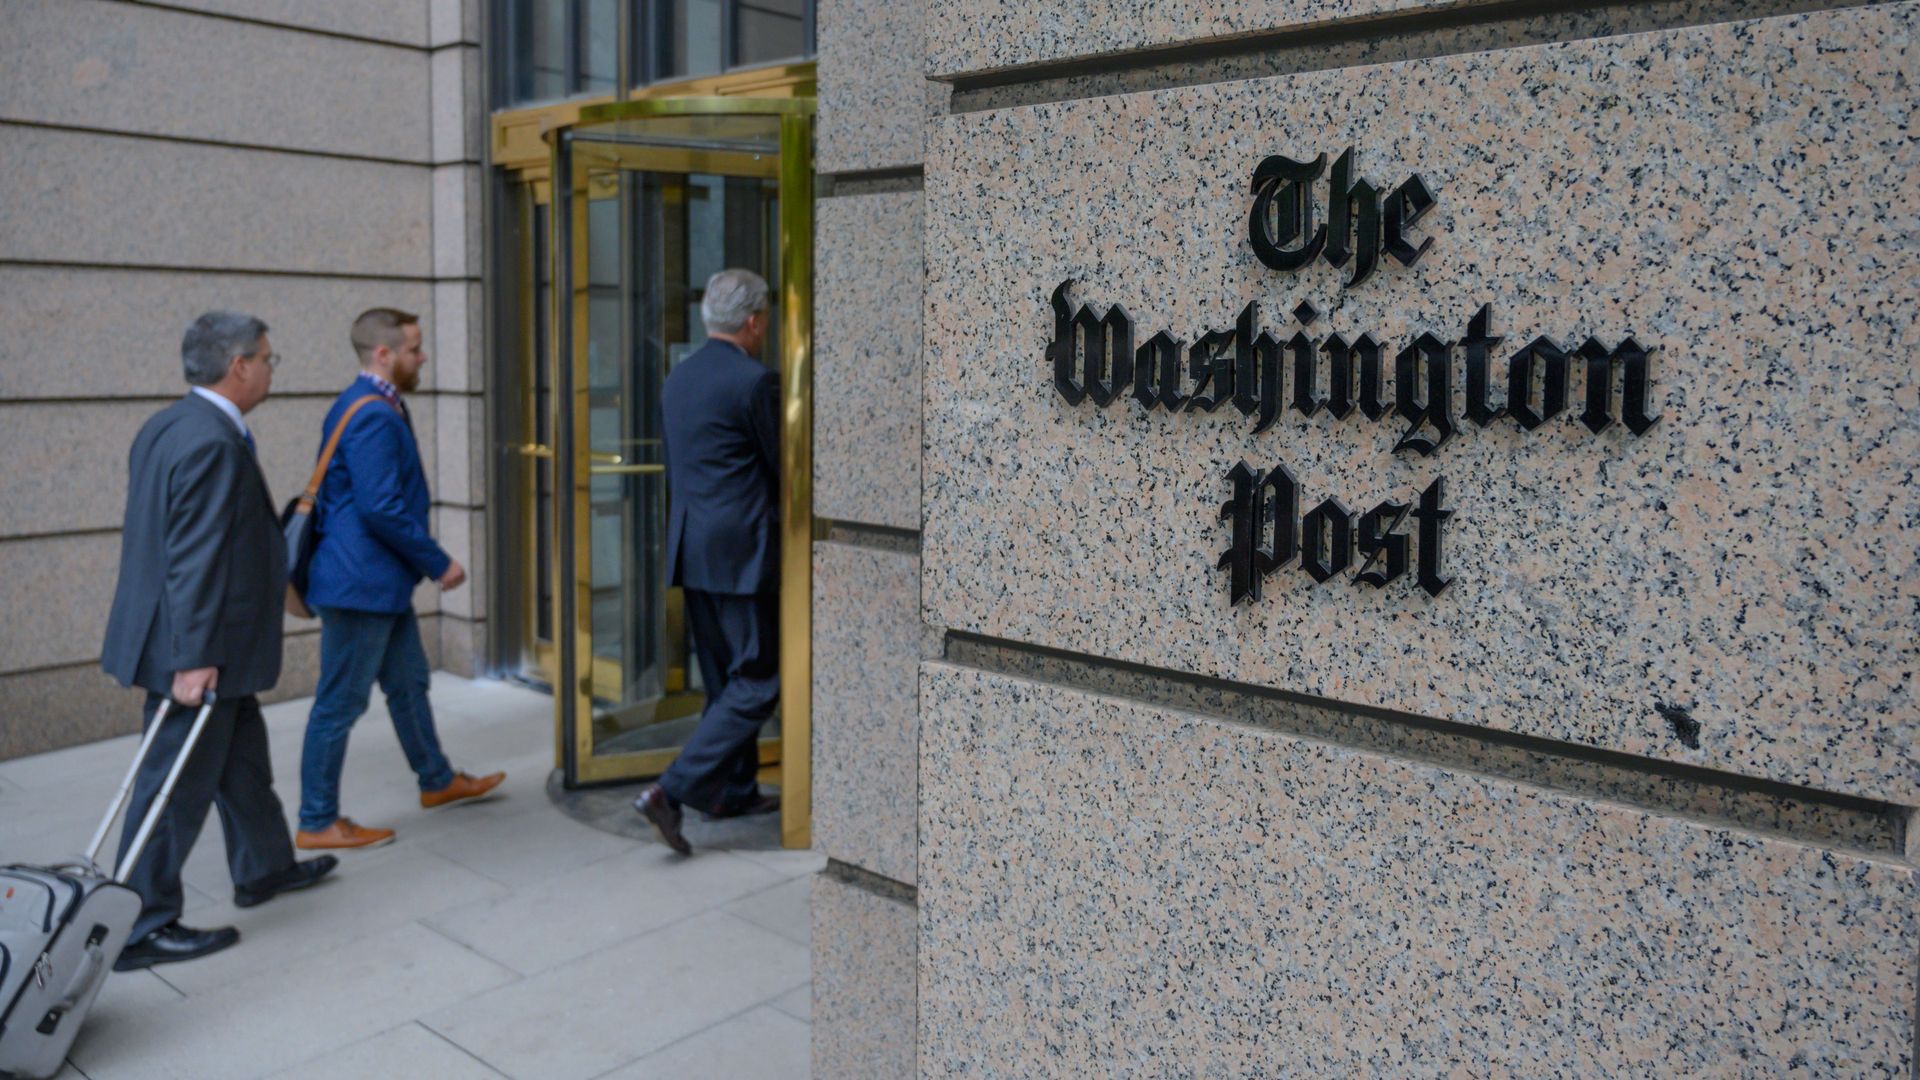 People entering the Washington Post building in D.C. in 2019.